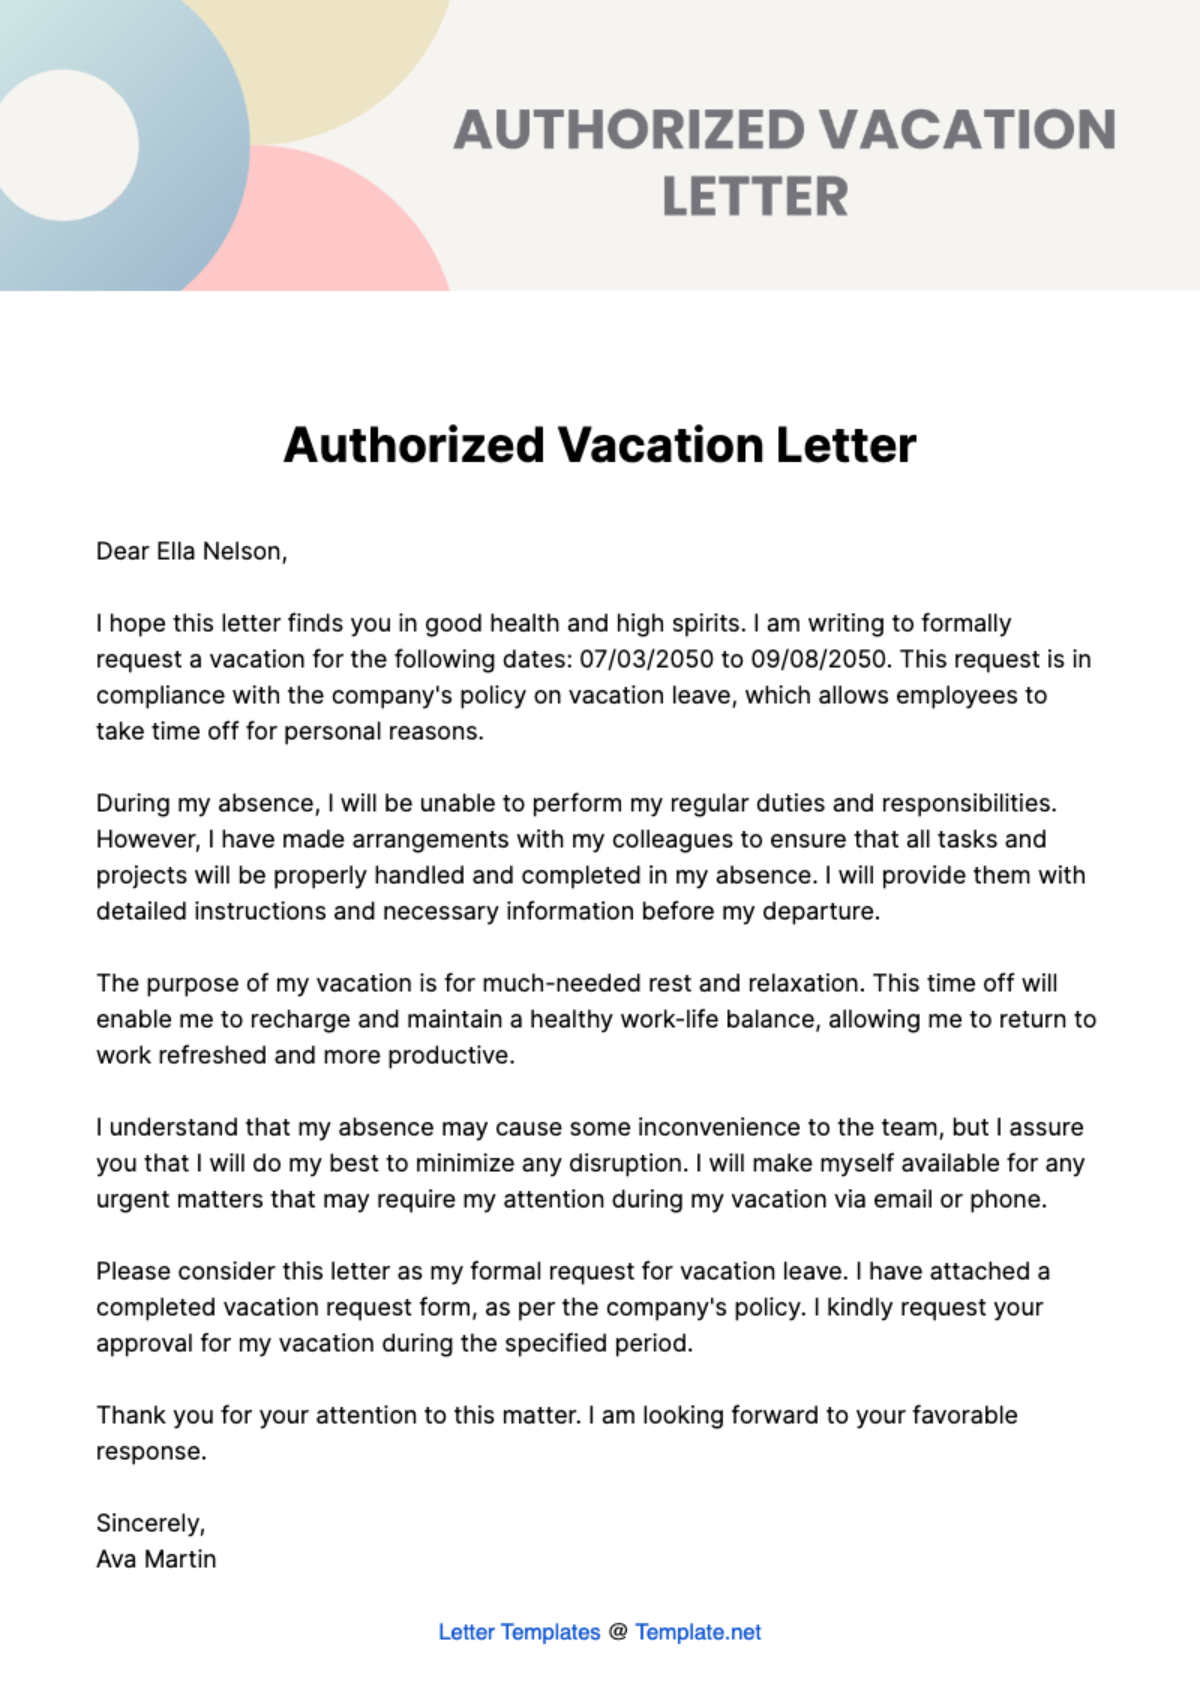 Free Authorized Vacation Letter Template